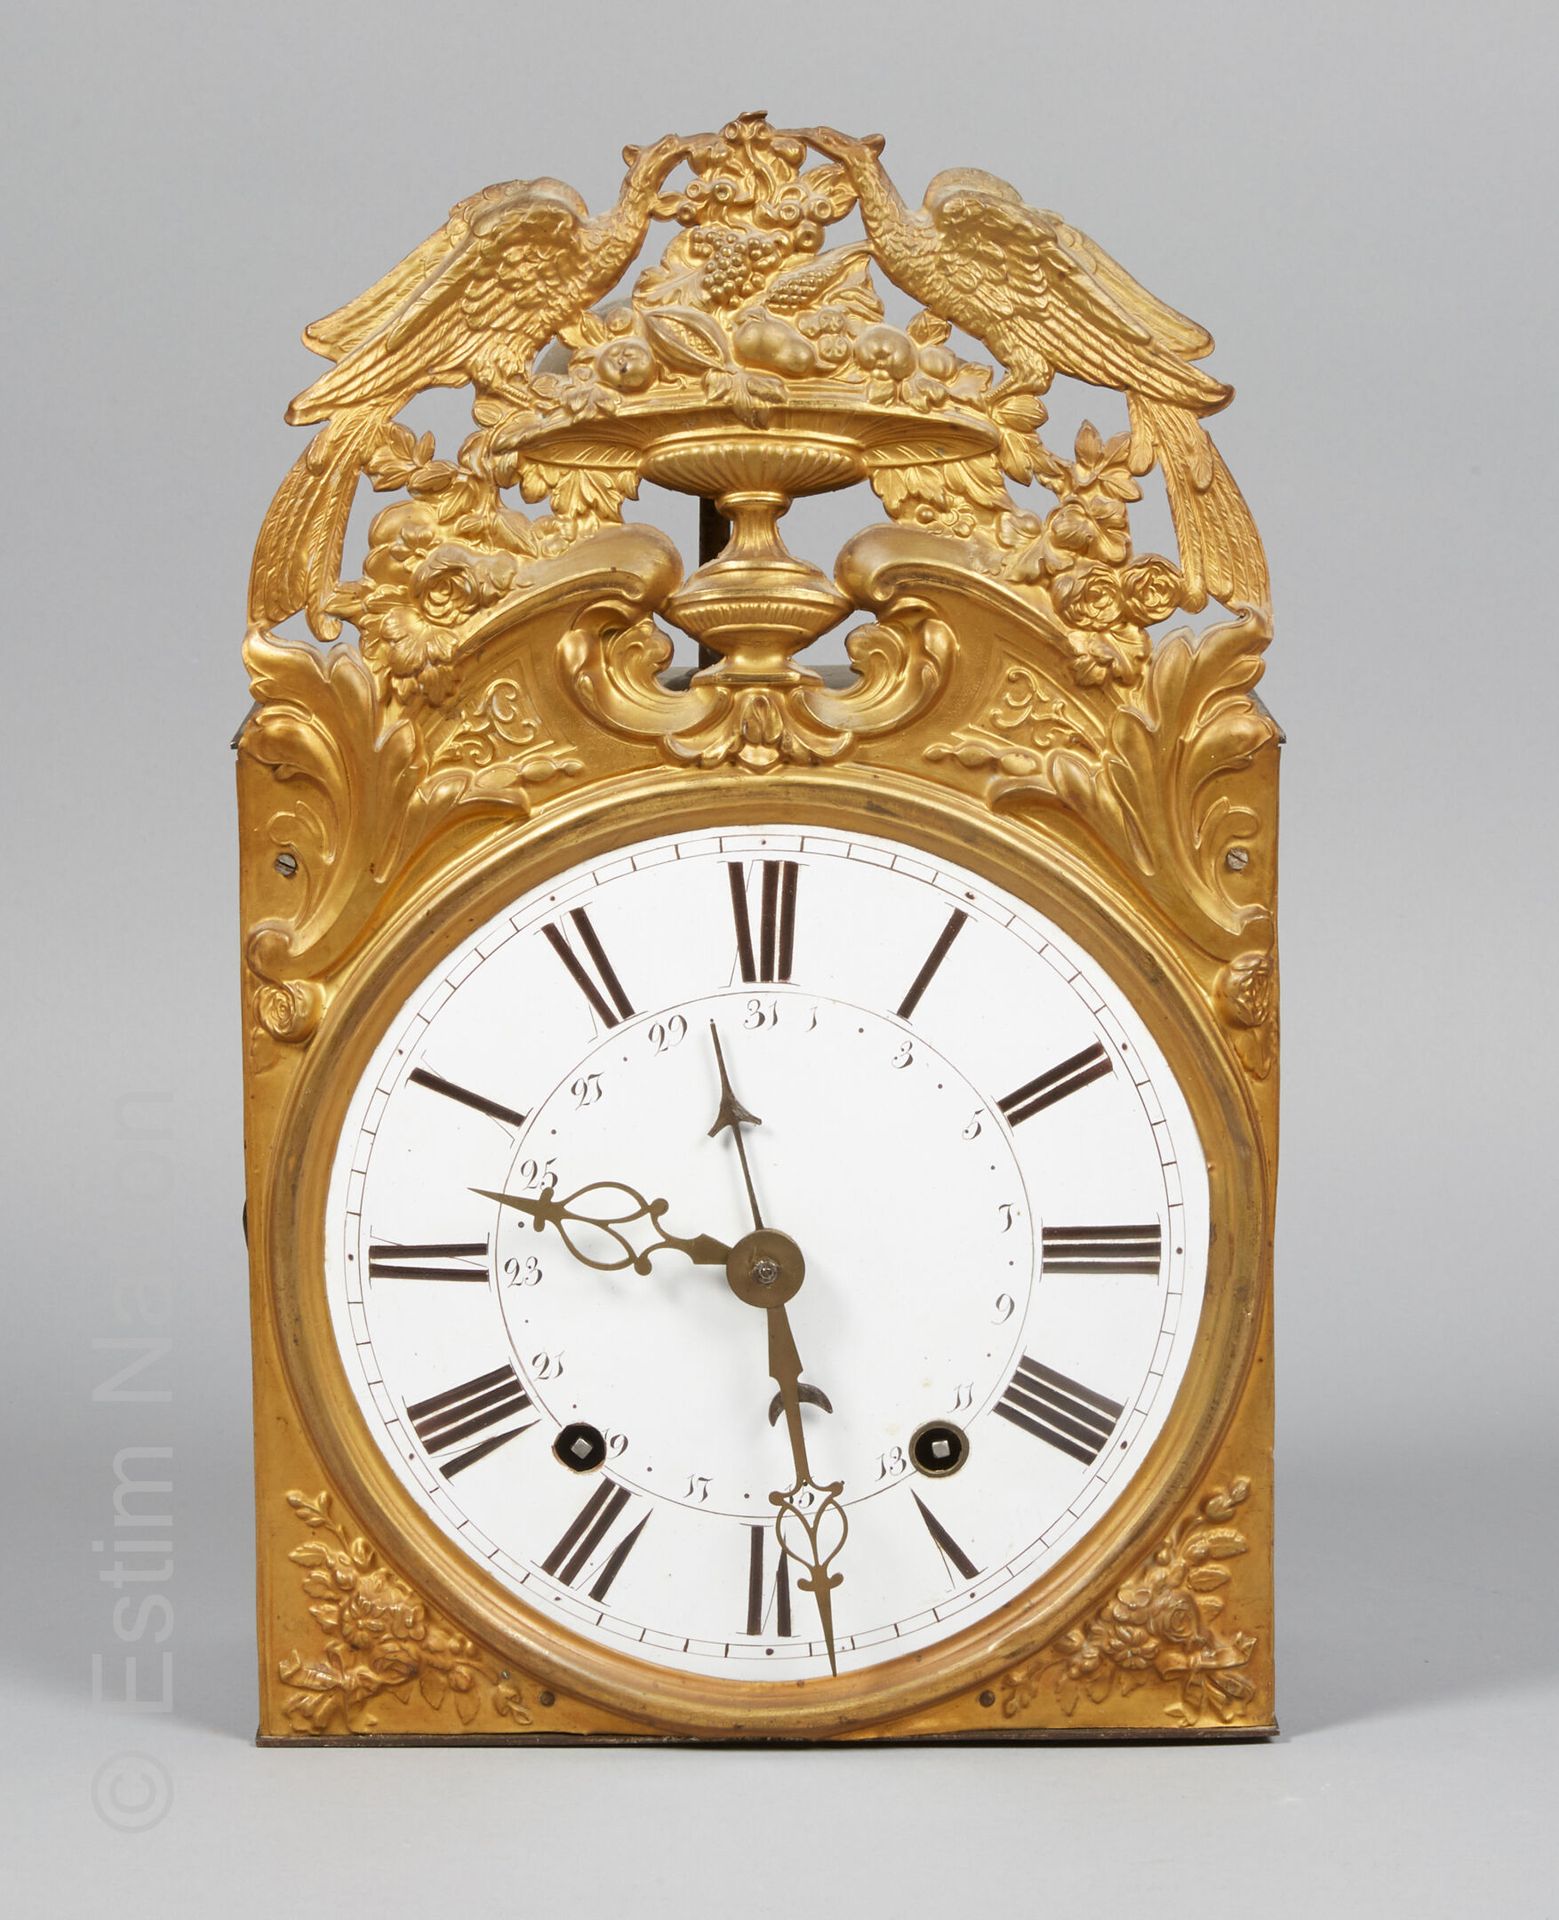 HORLOGERIE Floor clock movement with gilded and embossed brass decoration of two&hellip;